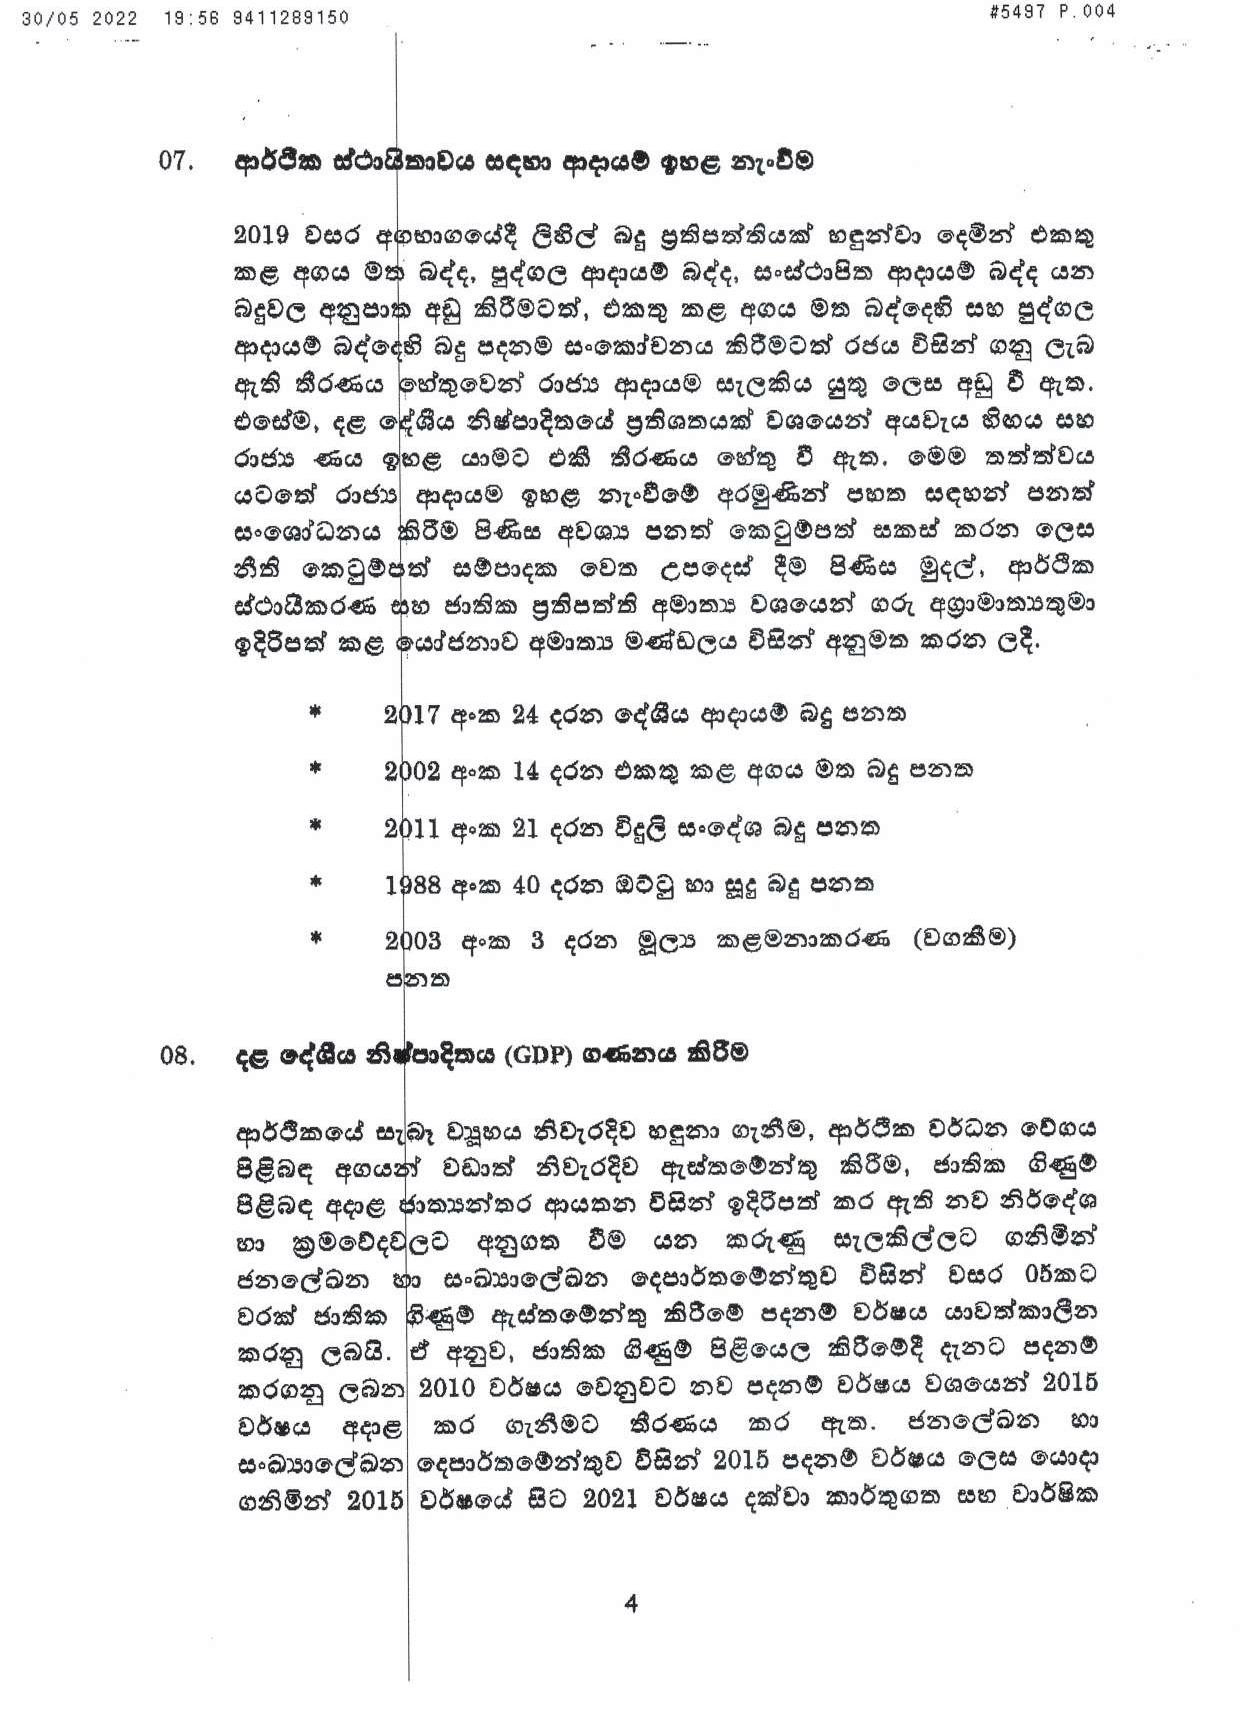 Cabinet Decisions on 30.05.2022 S page 004